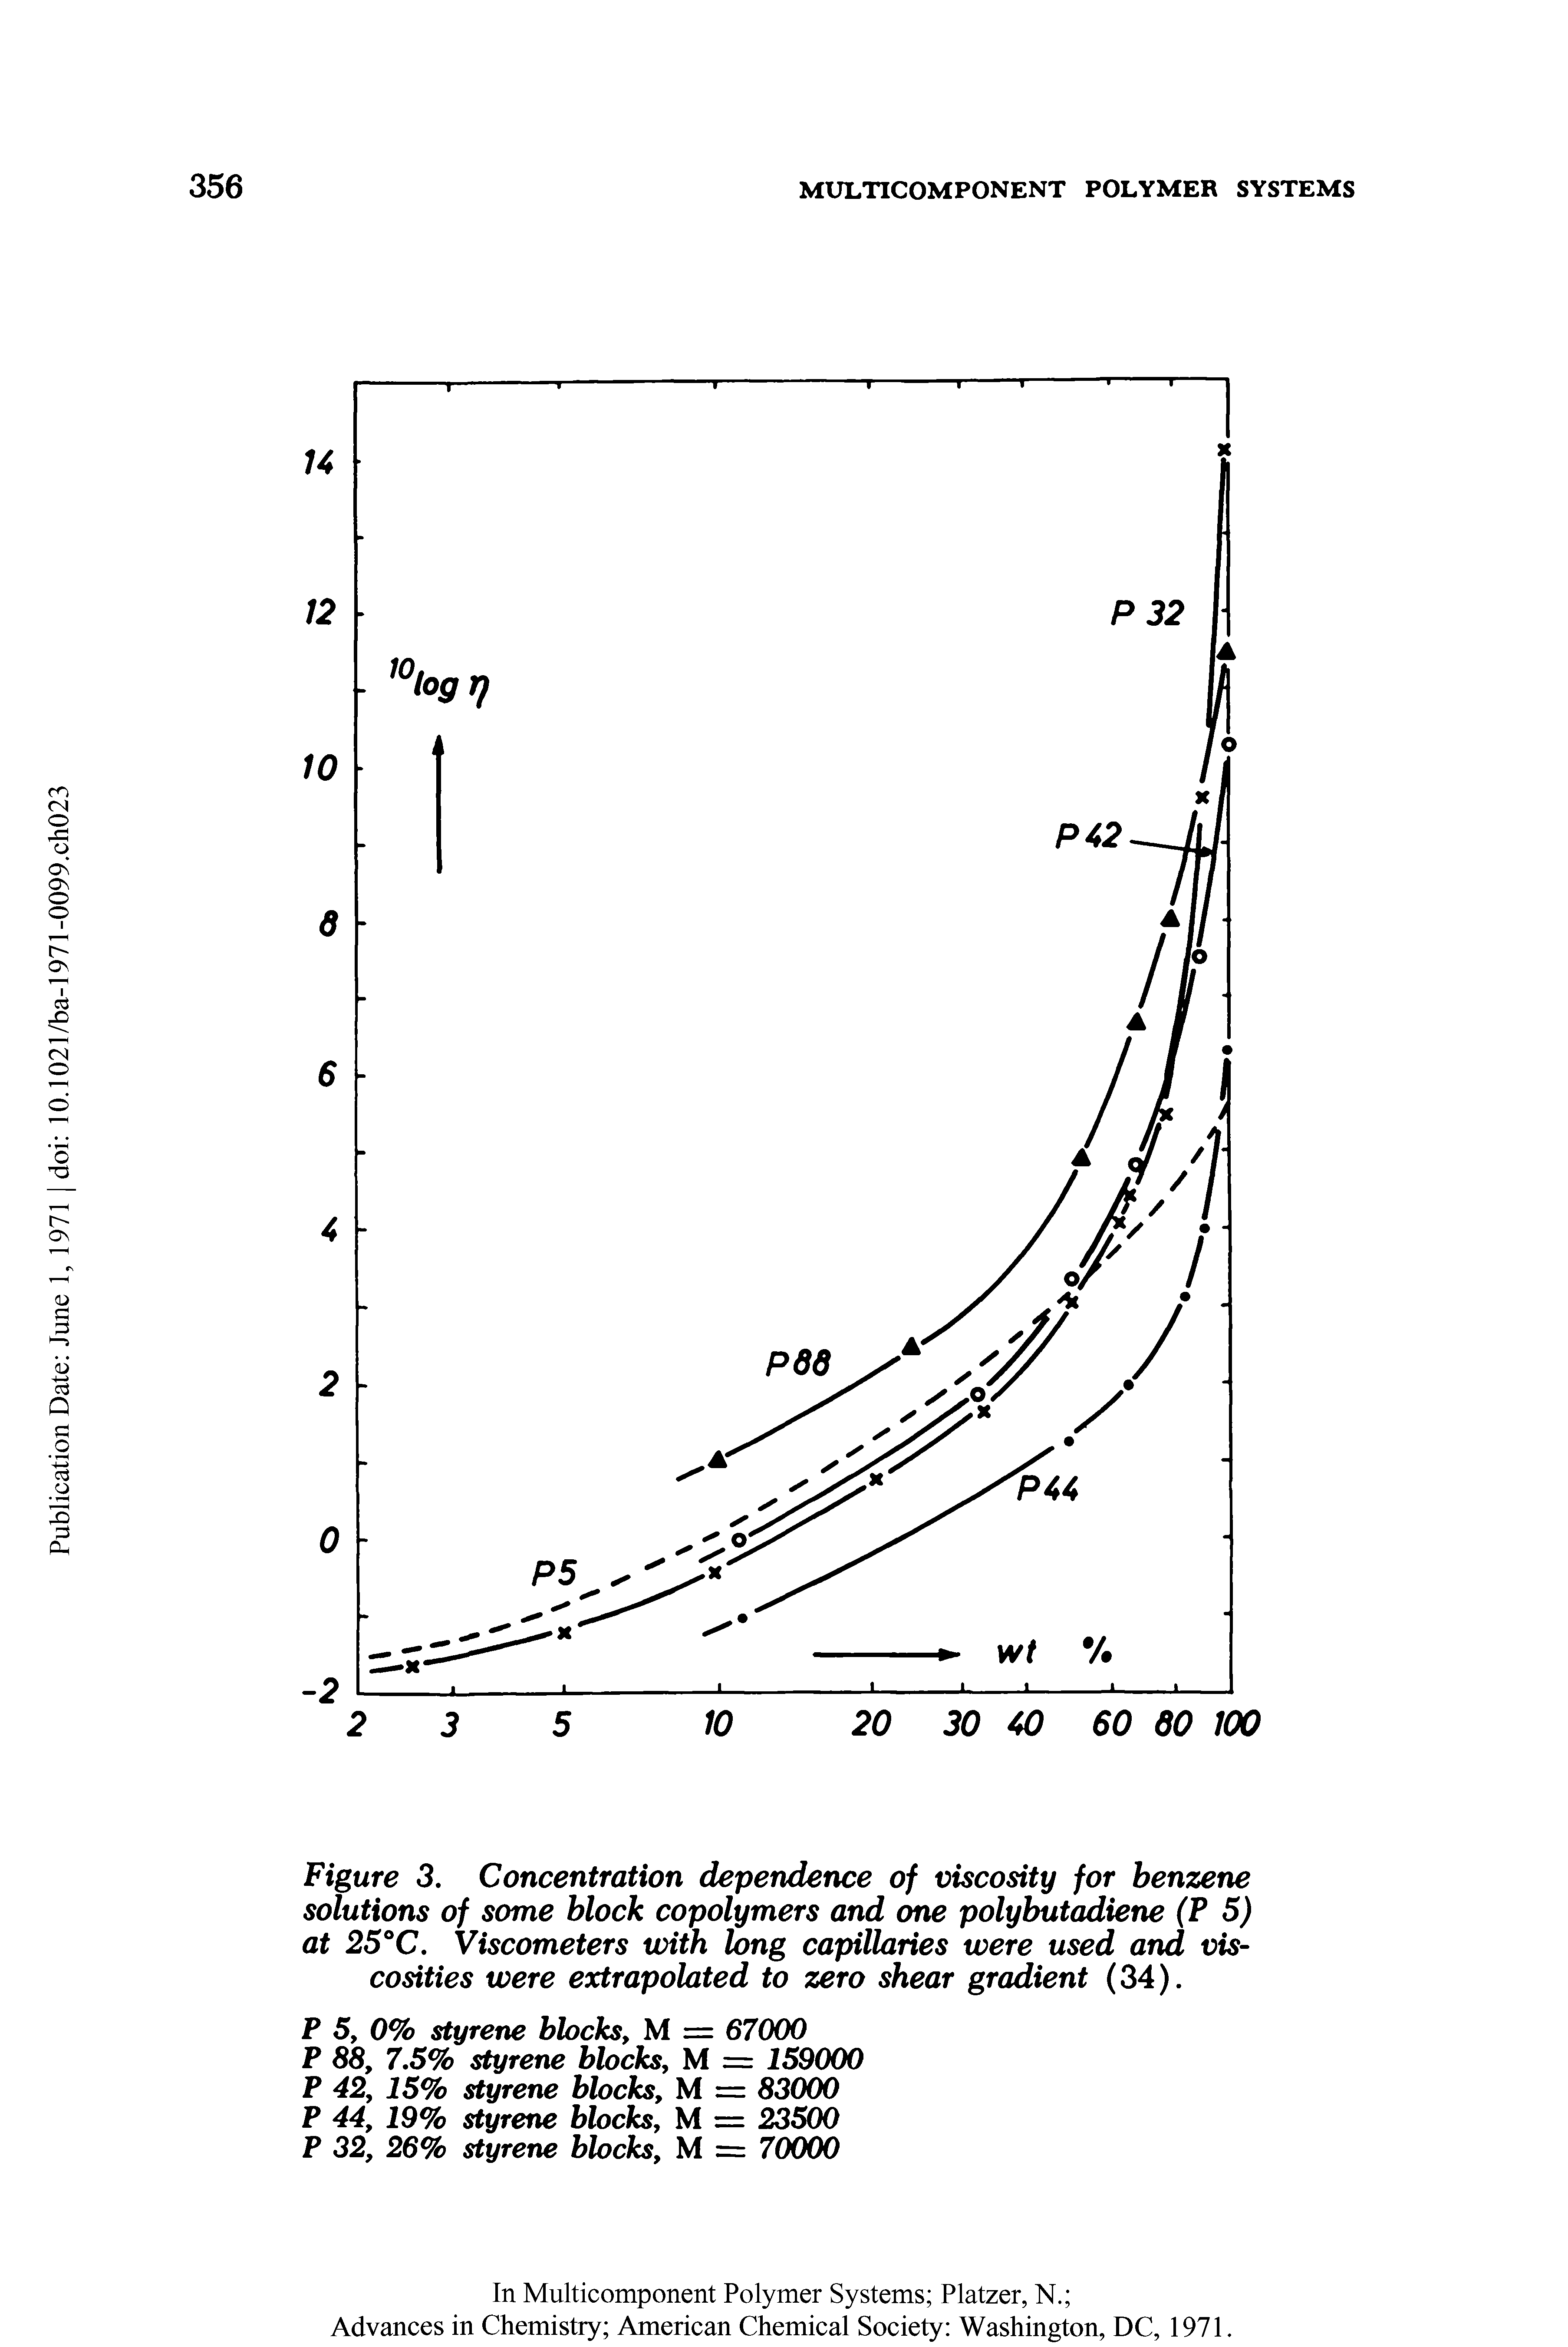 Figure 3. Concentration dependence of viscosity for benzene solutions of some block copolymers and one polybutadiene (P 5) at 25°C. Viscometers with long capillaries were used and viscosities were extrapolated to zero shear gradient (34).